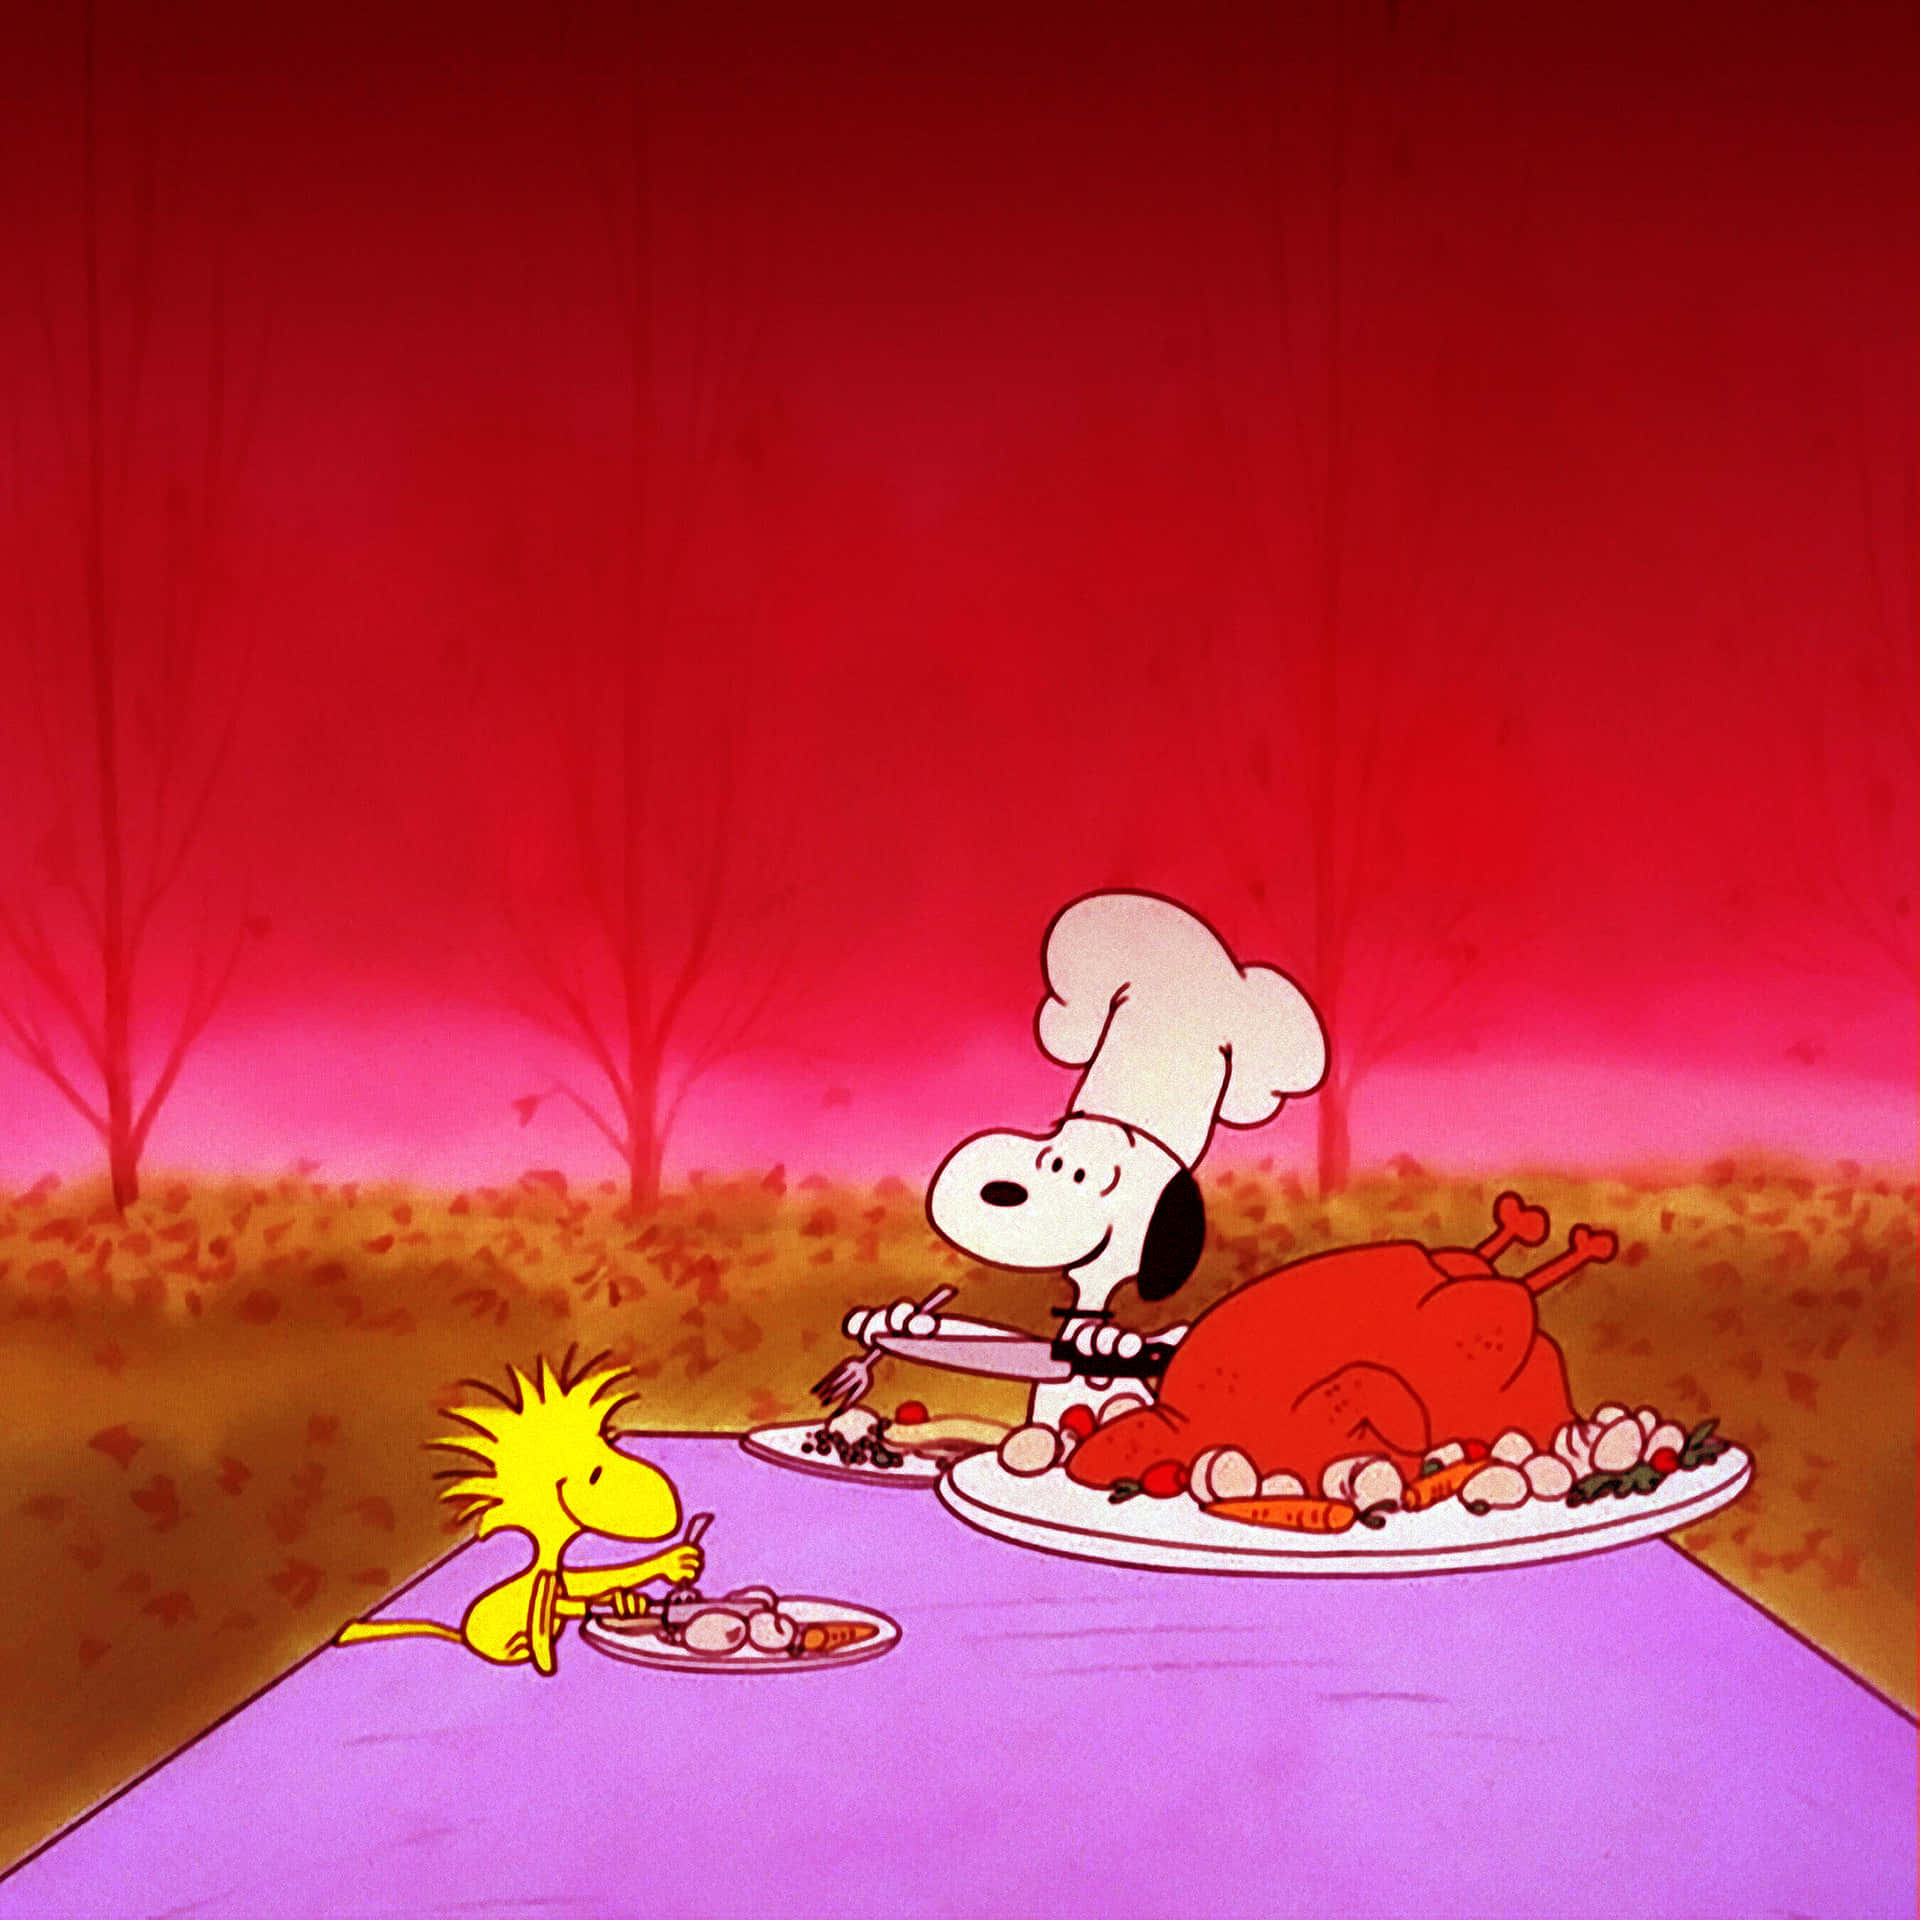 Snoopy Celebrating Thanksgiving With A Feast